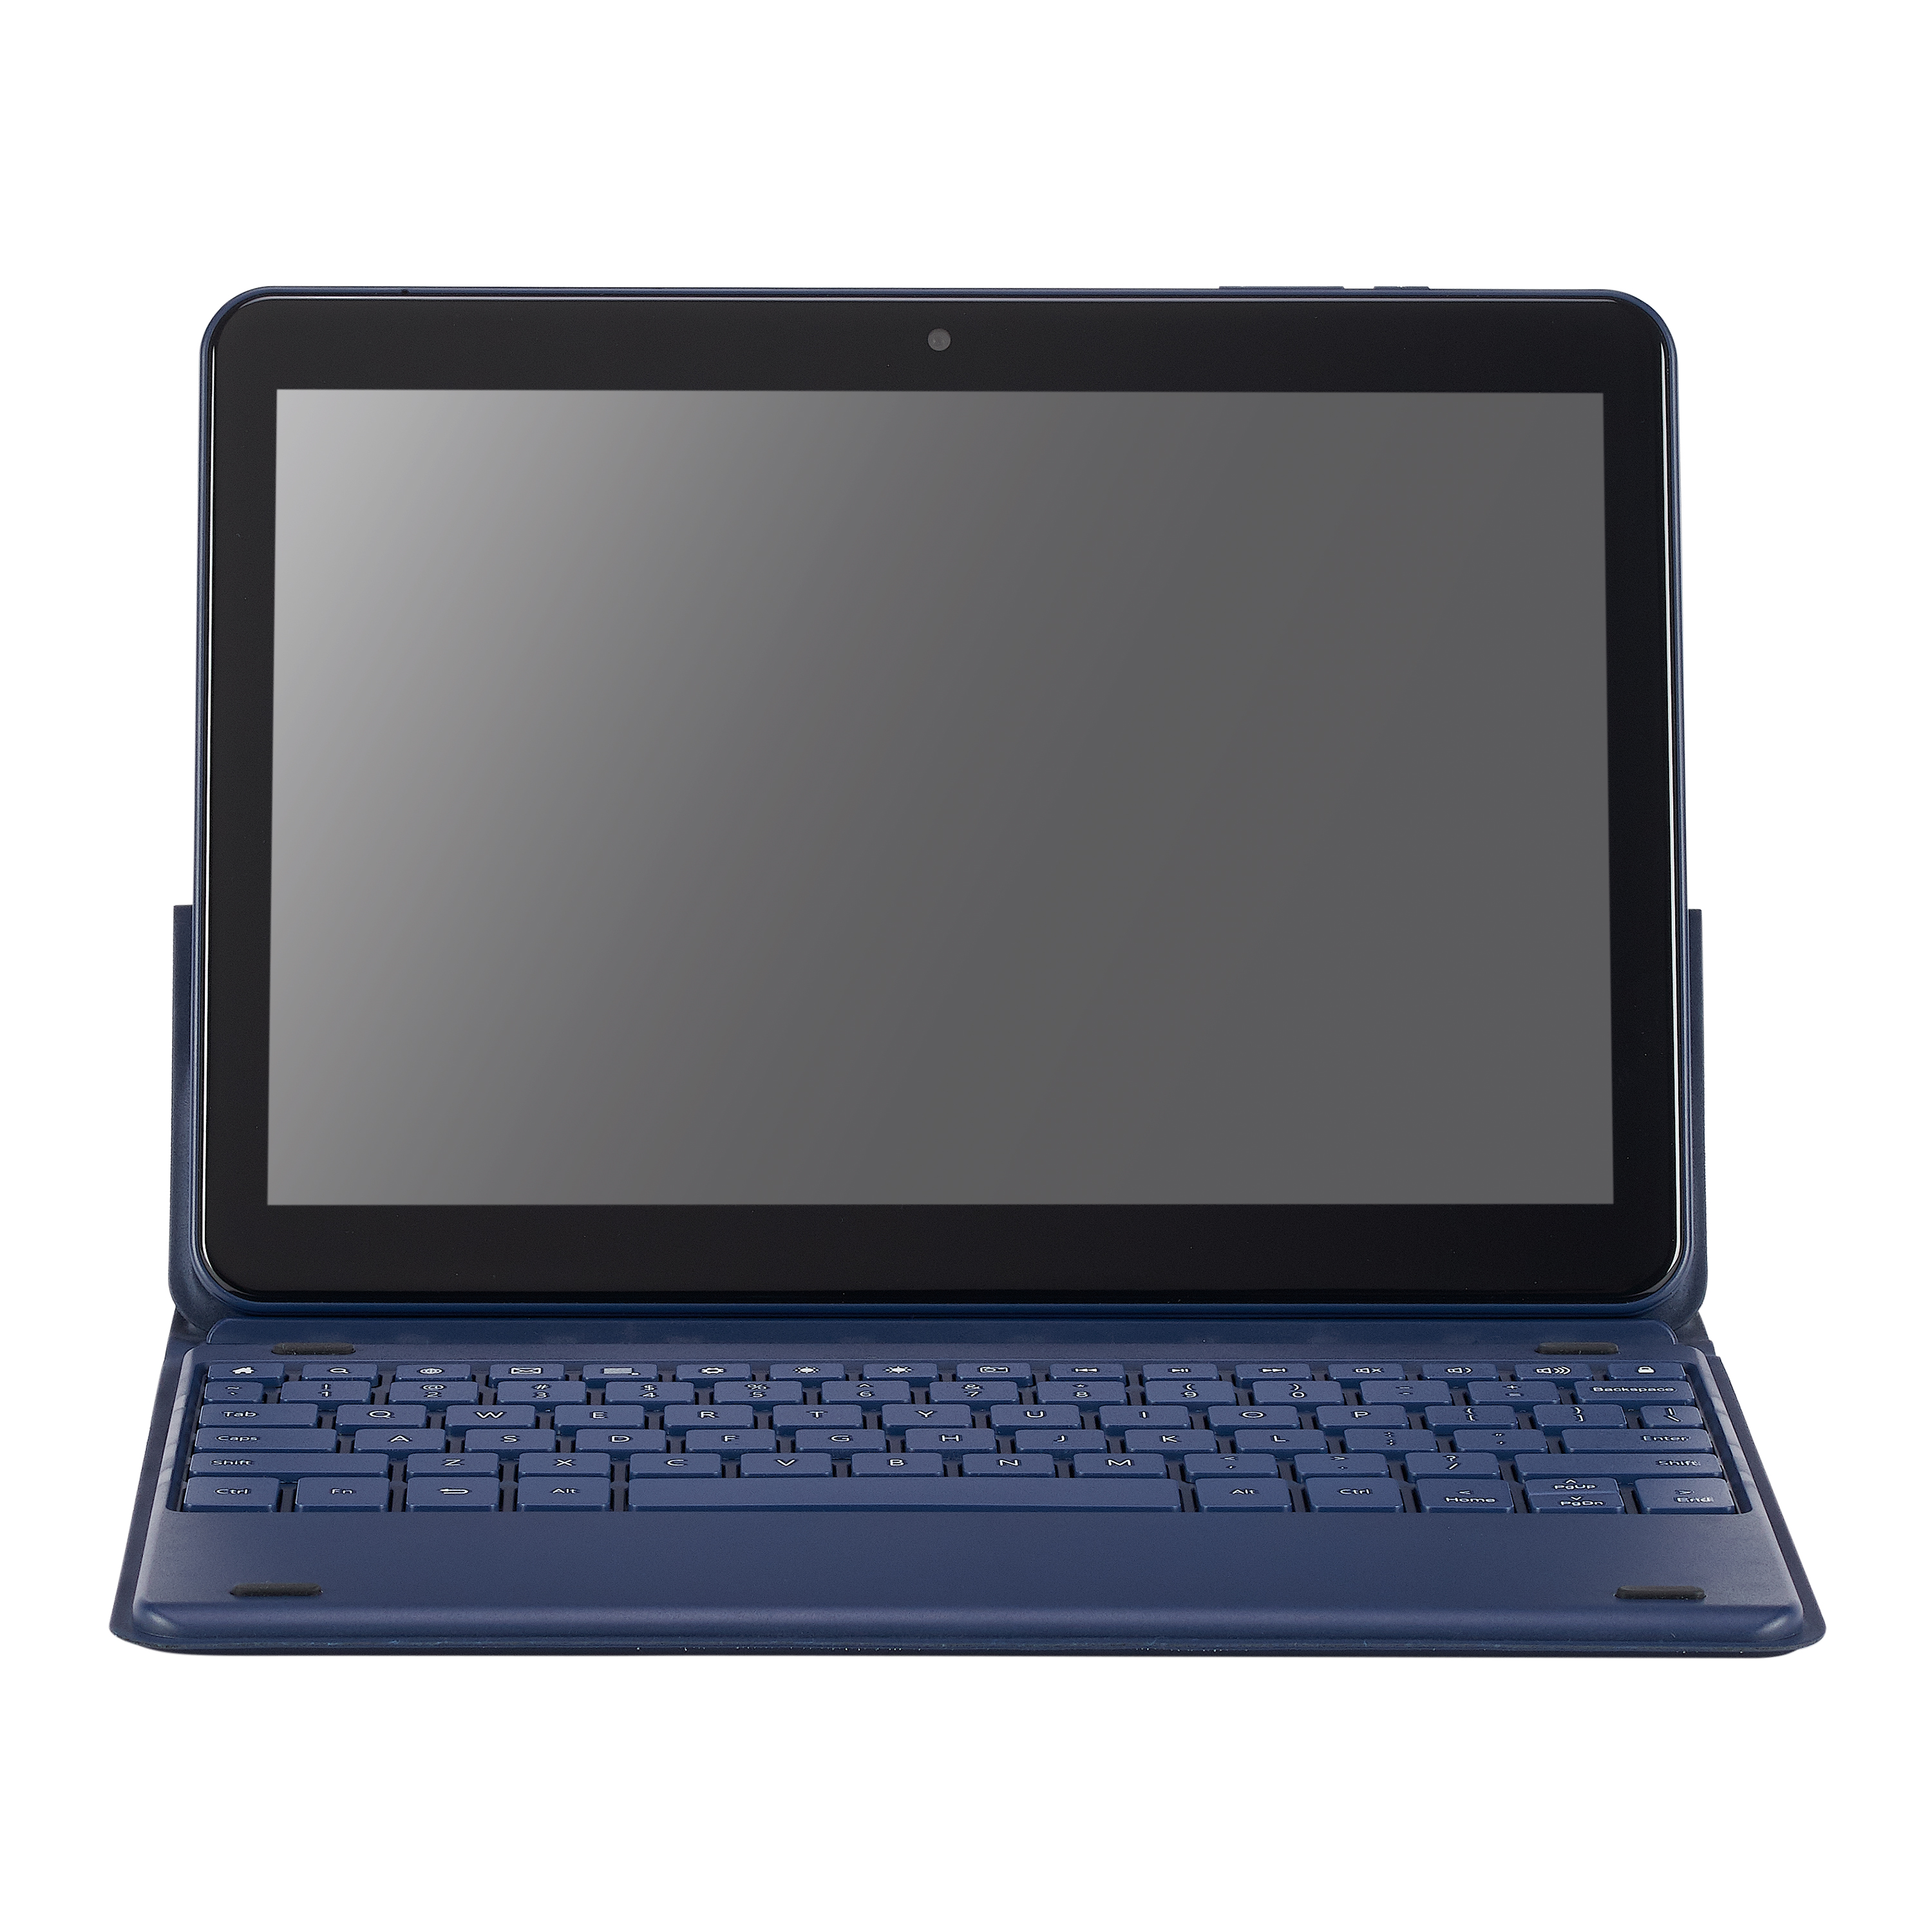 Onn. 10.1" Android Tablet with Detachable Keyboard, 16GB, Bonus $20 off Walmart eBooks Included - image 5 of 7